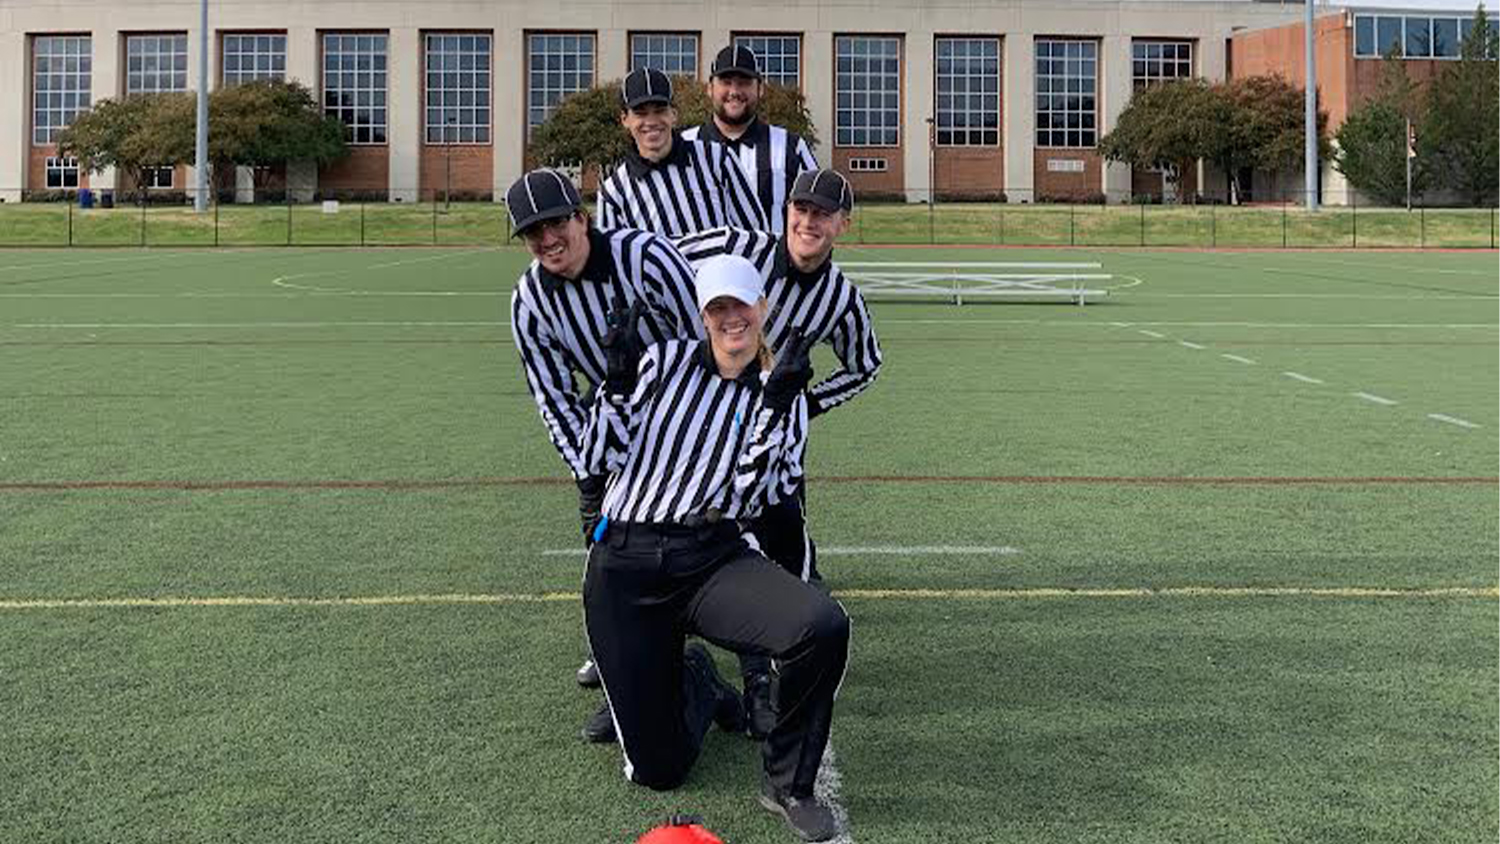 Hannah Williams and other students in referee uniforms lined up on a grassy field